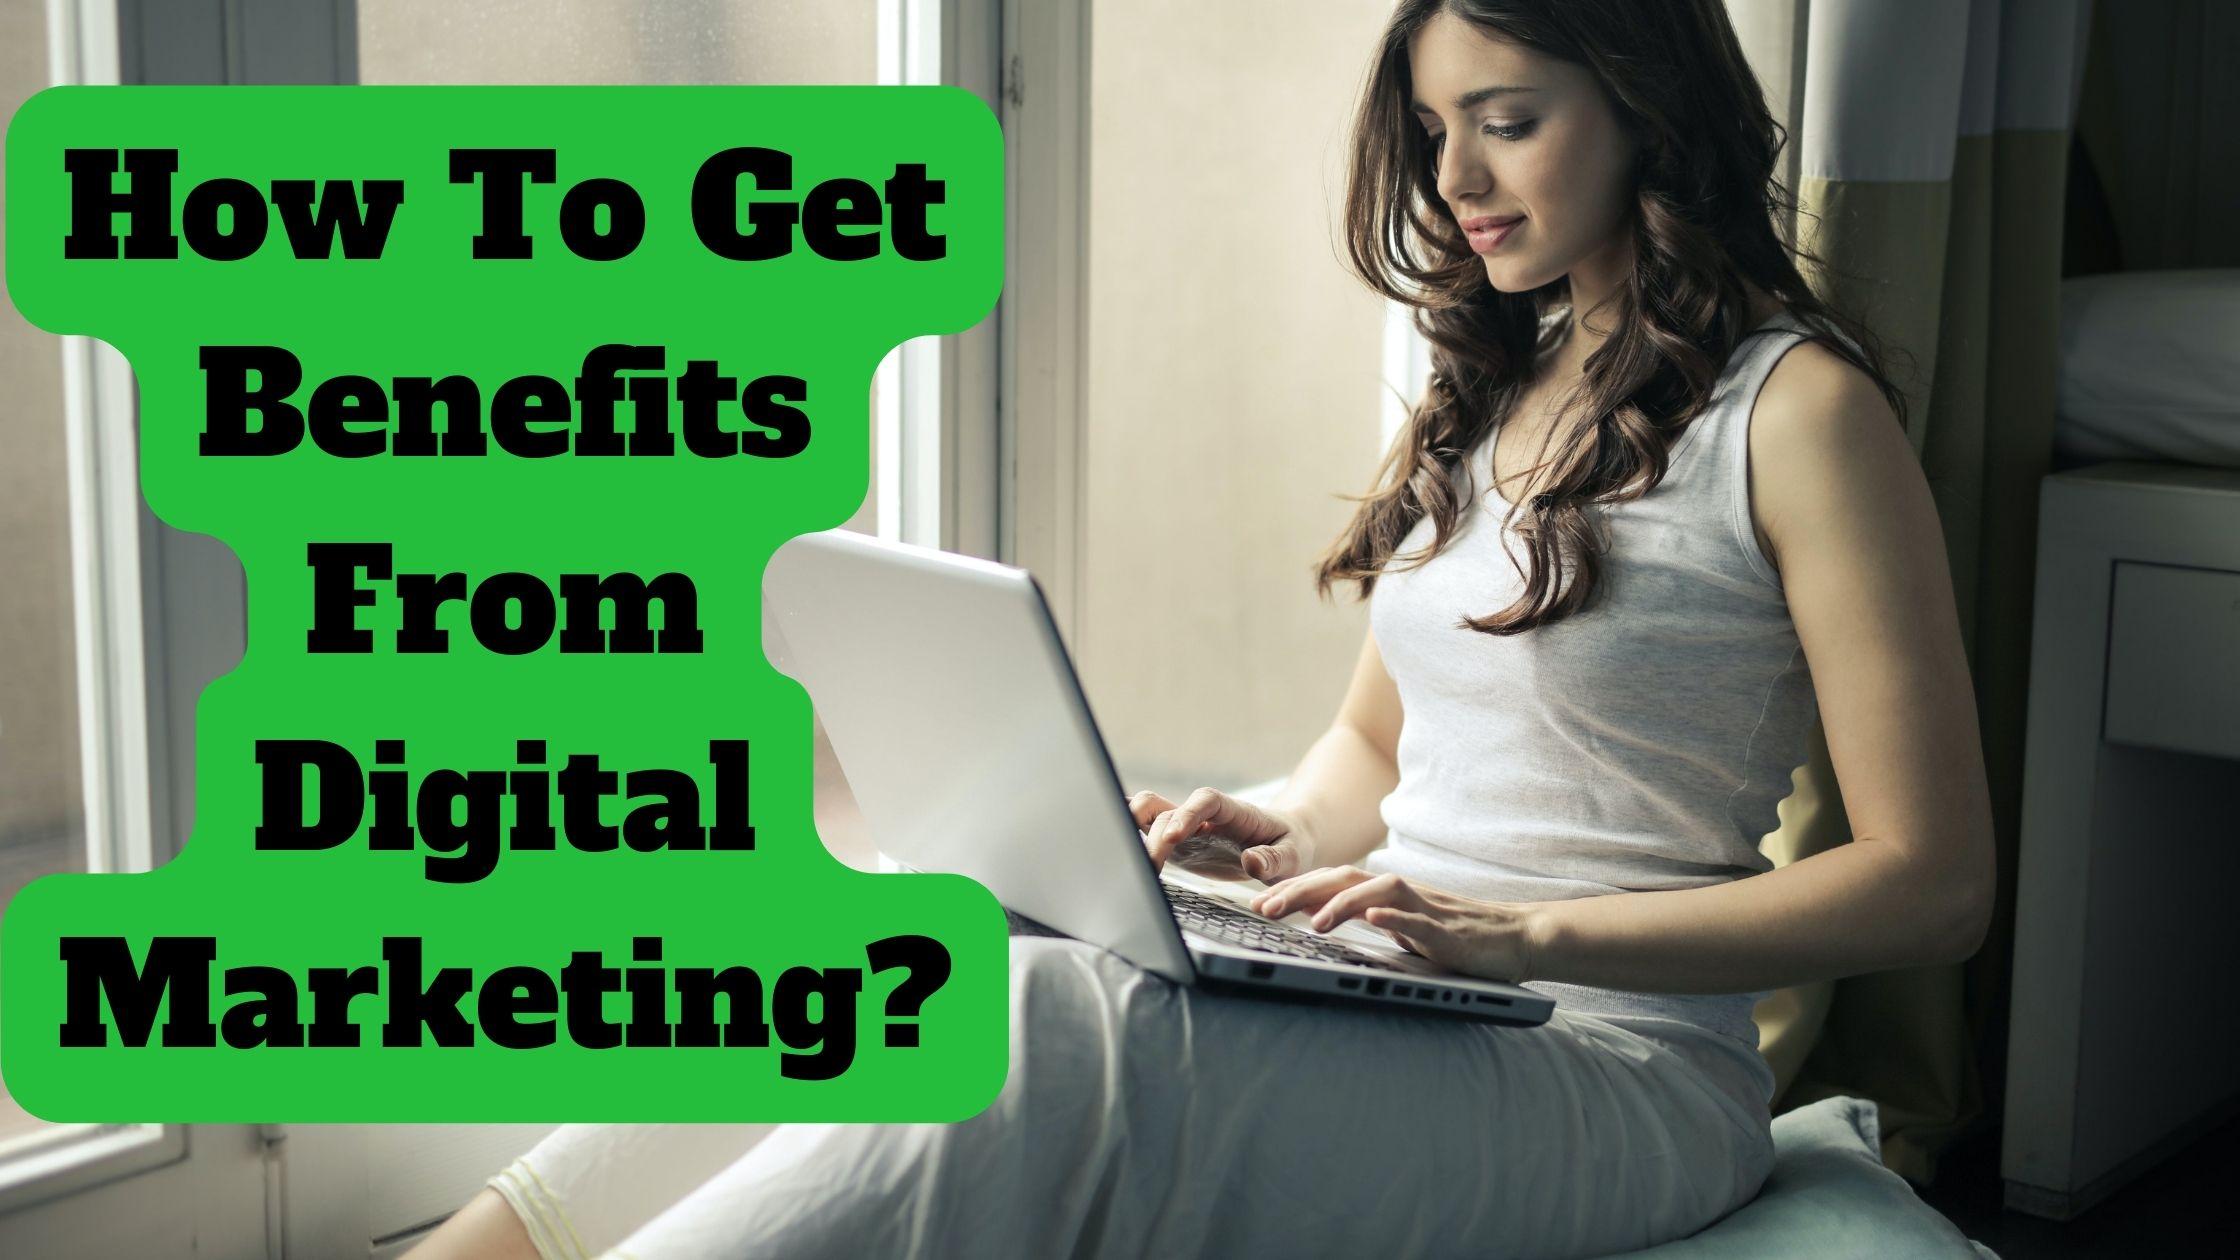 How To Get Benefits From Digital Marketing?